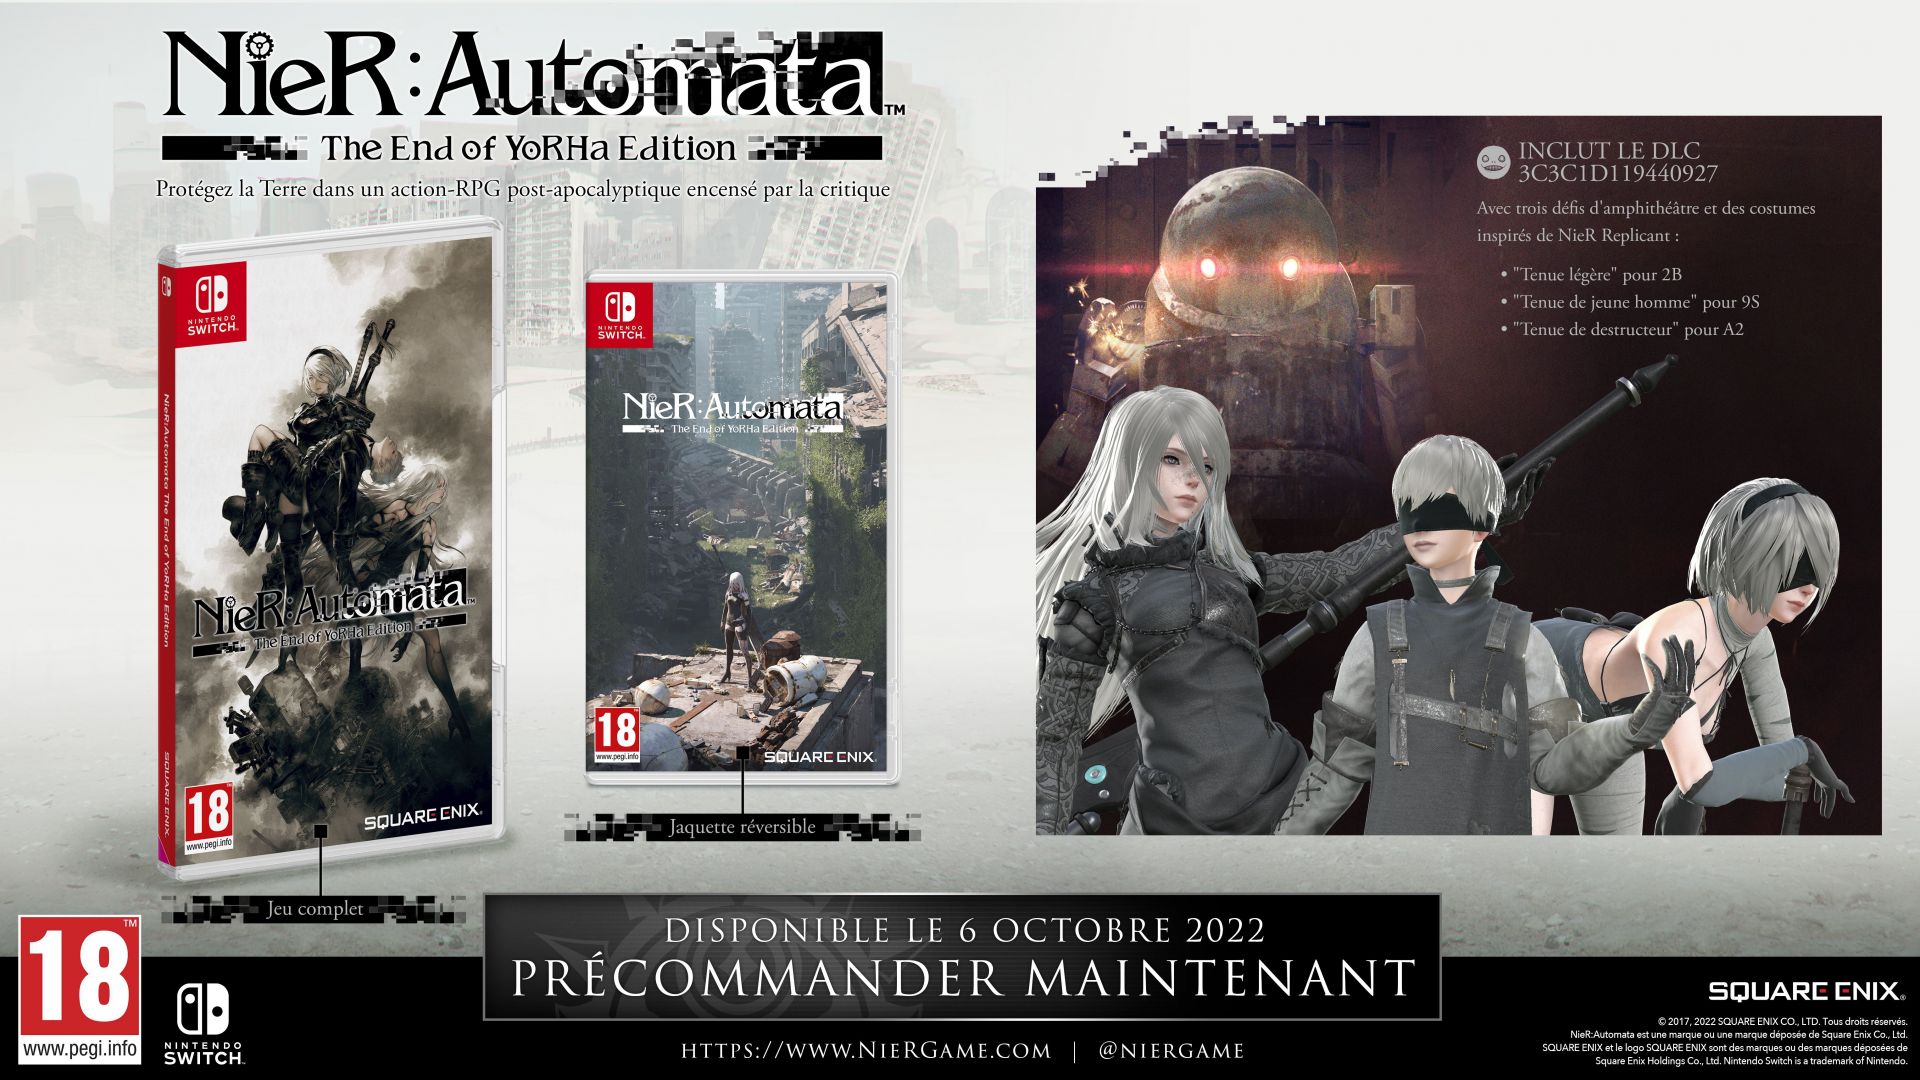 NieR: Automata The End of YoRHa Edition (SWITCH) NieR Automata The End of YoRHa Edition